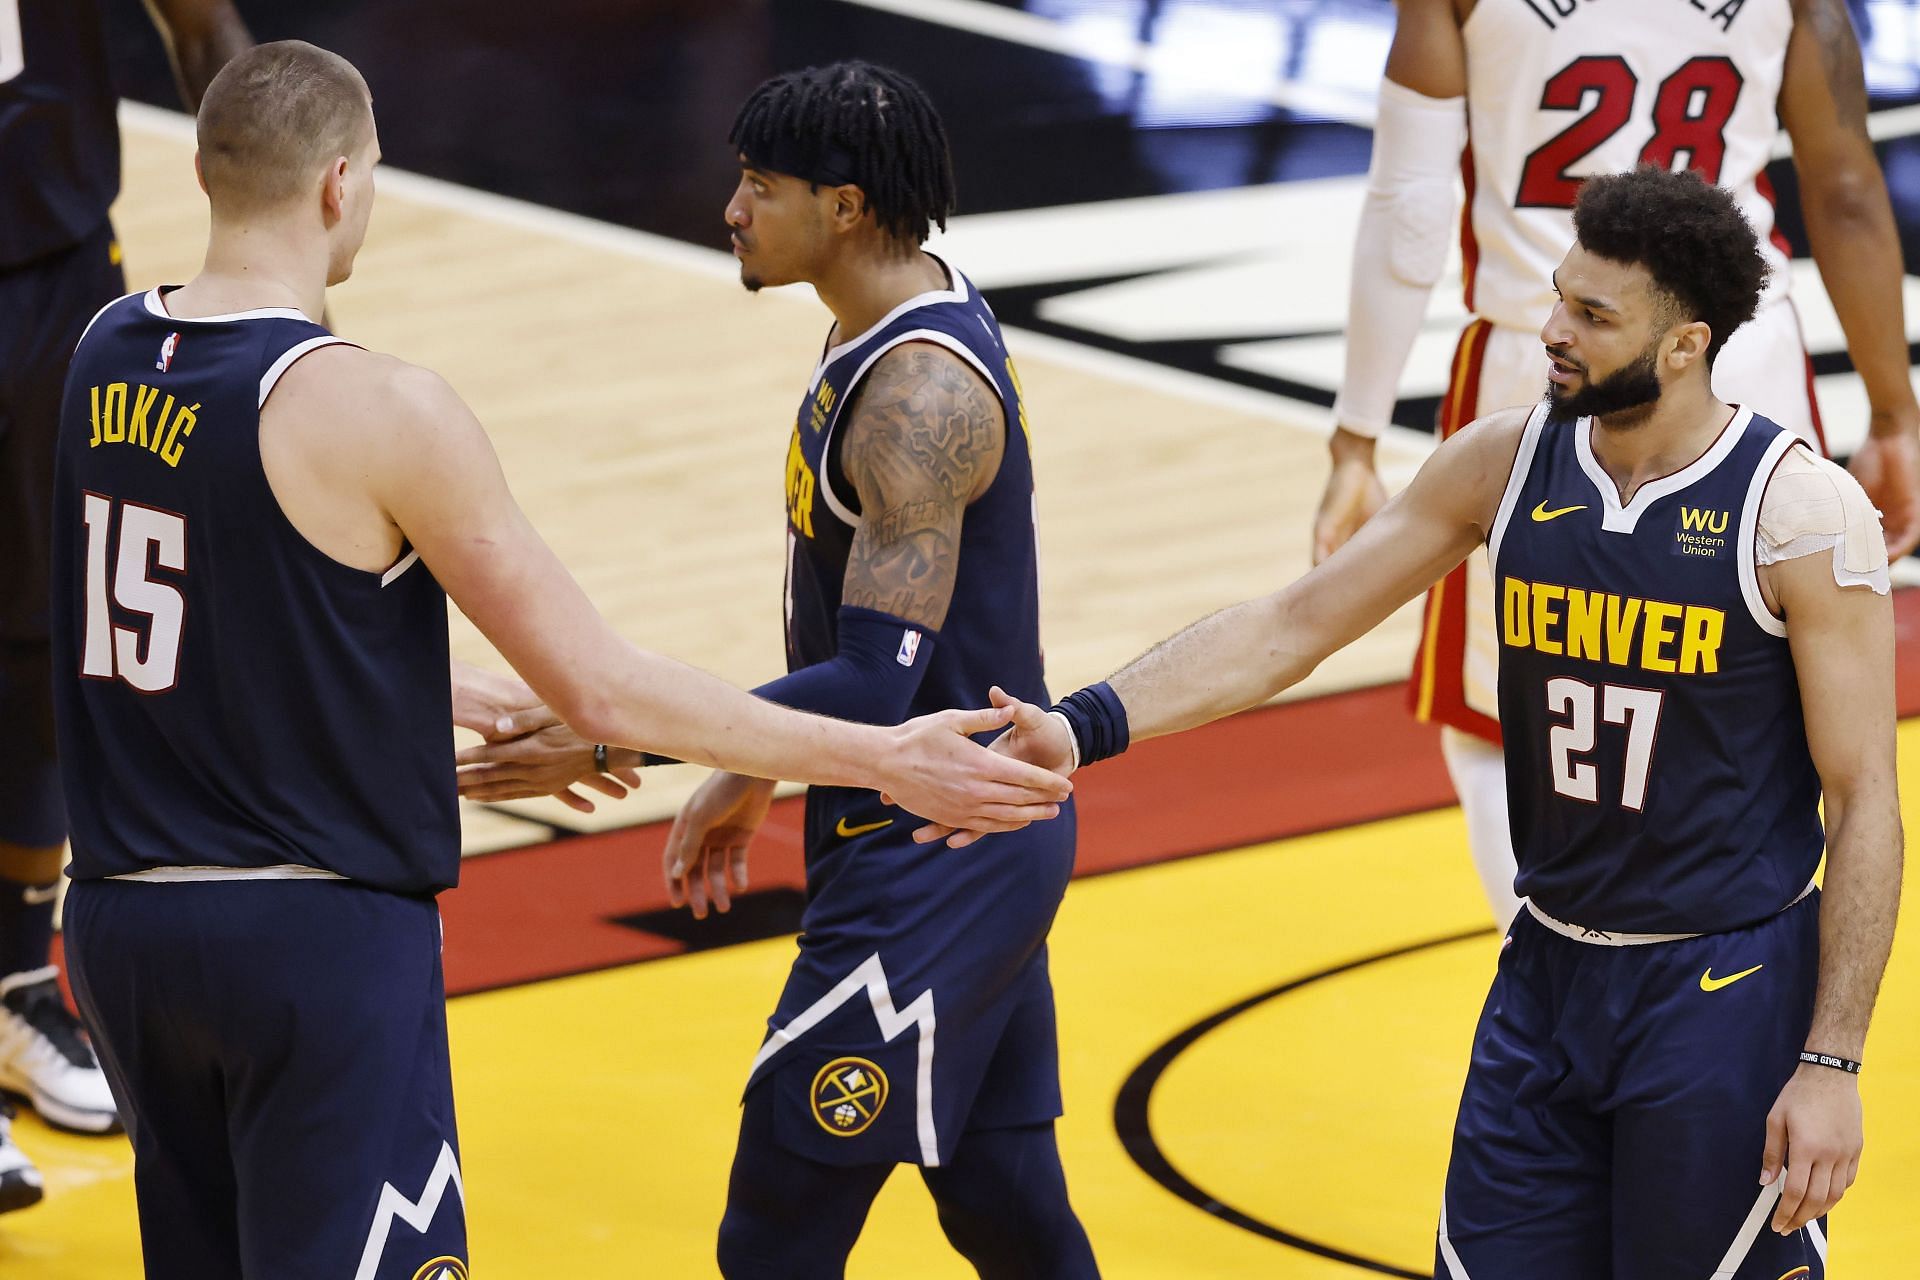 The Denver Nuggets badly outplayed the LA Clippers on both ends of the floor.